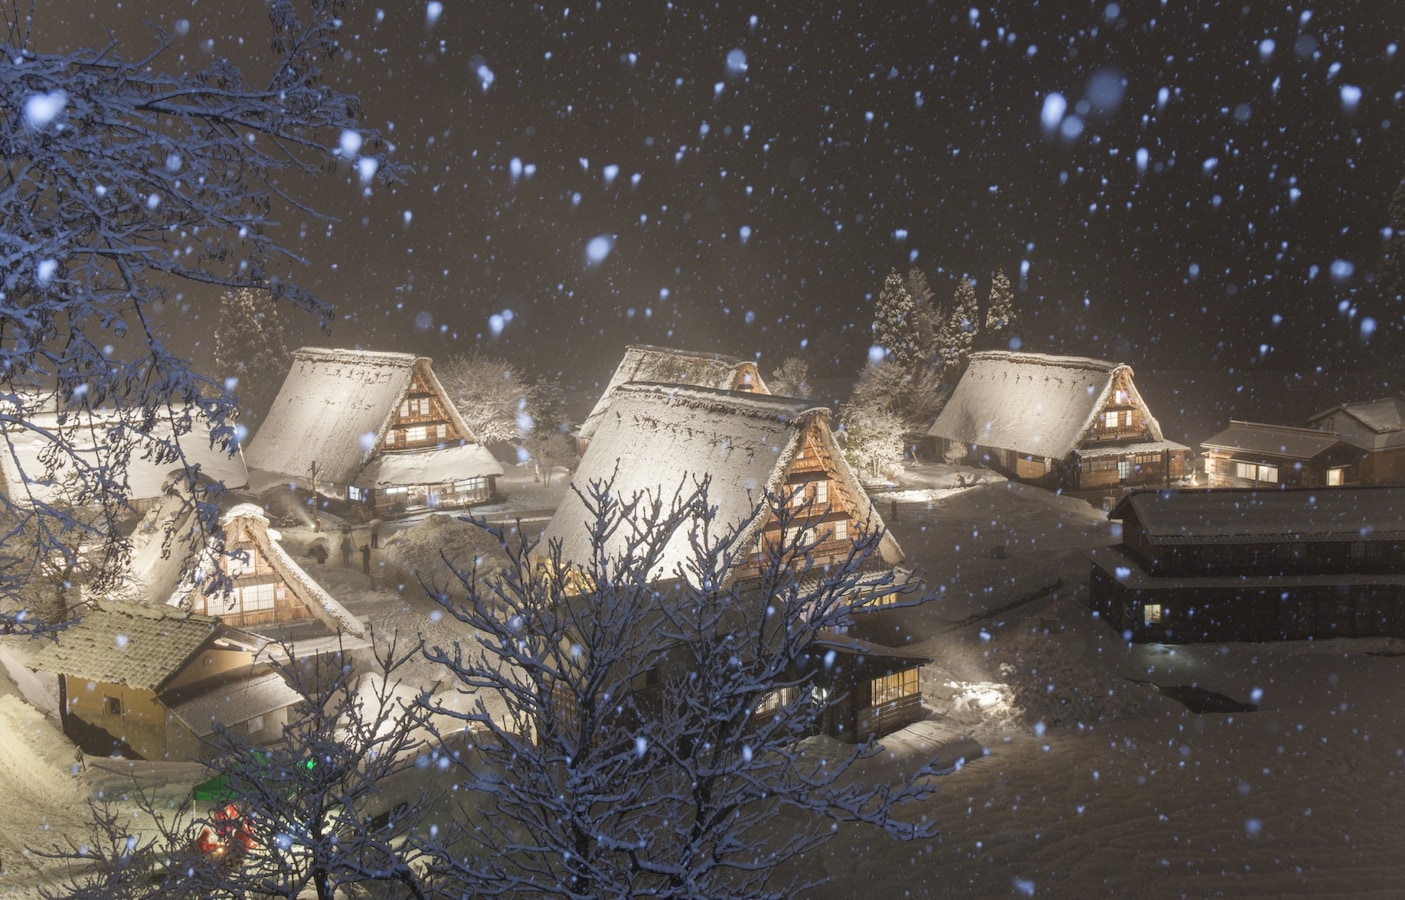 This Japanese Village Is One of the World's Snowiest Places